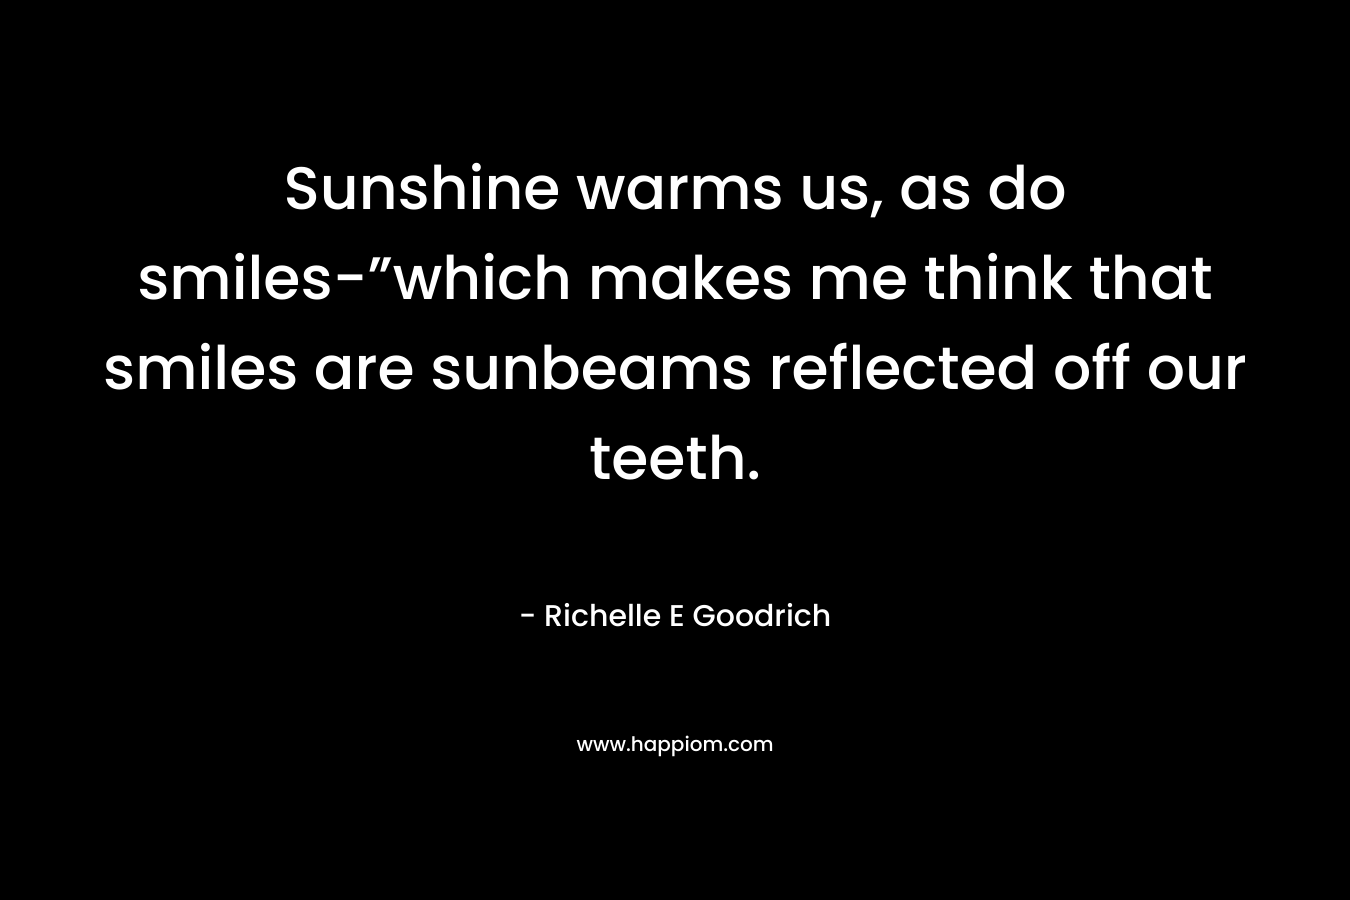 Sunshine warms us, as do smiles-”which makes me think that smiles are sunbeams reflected off our teeth.